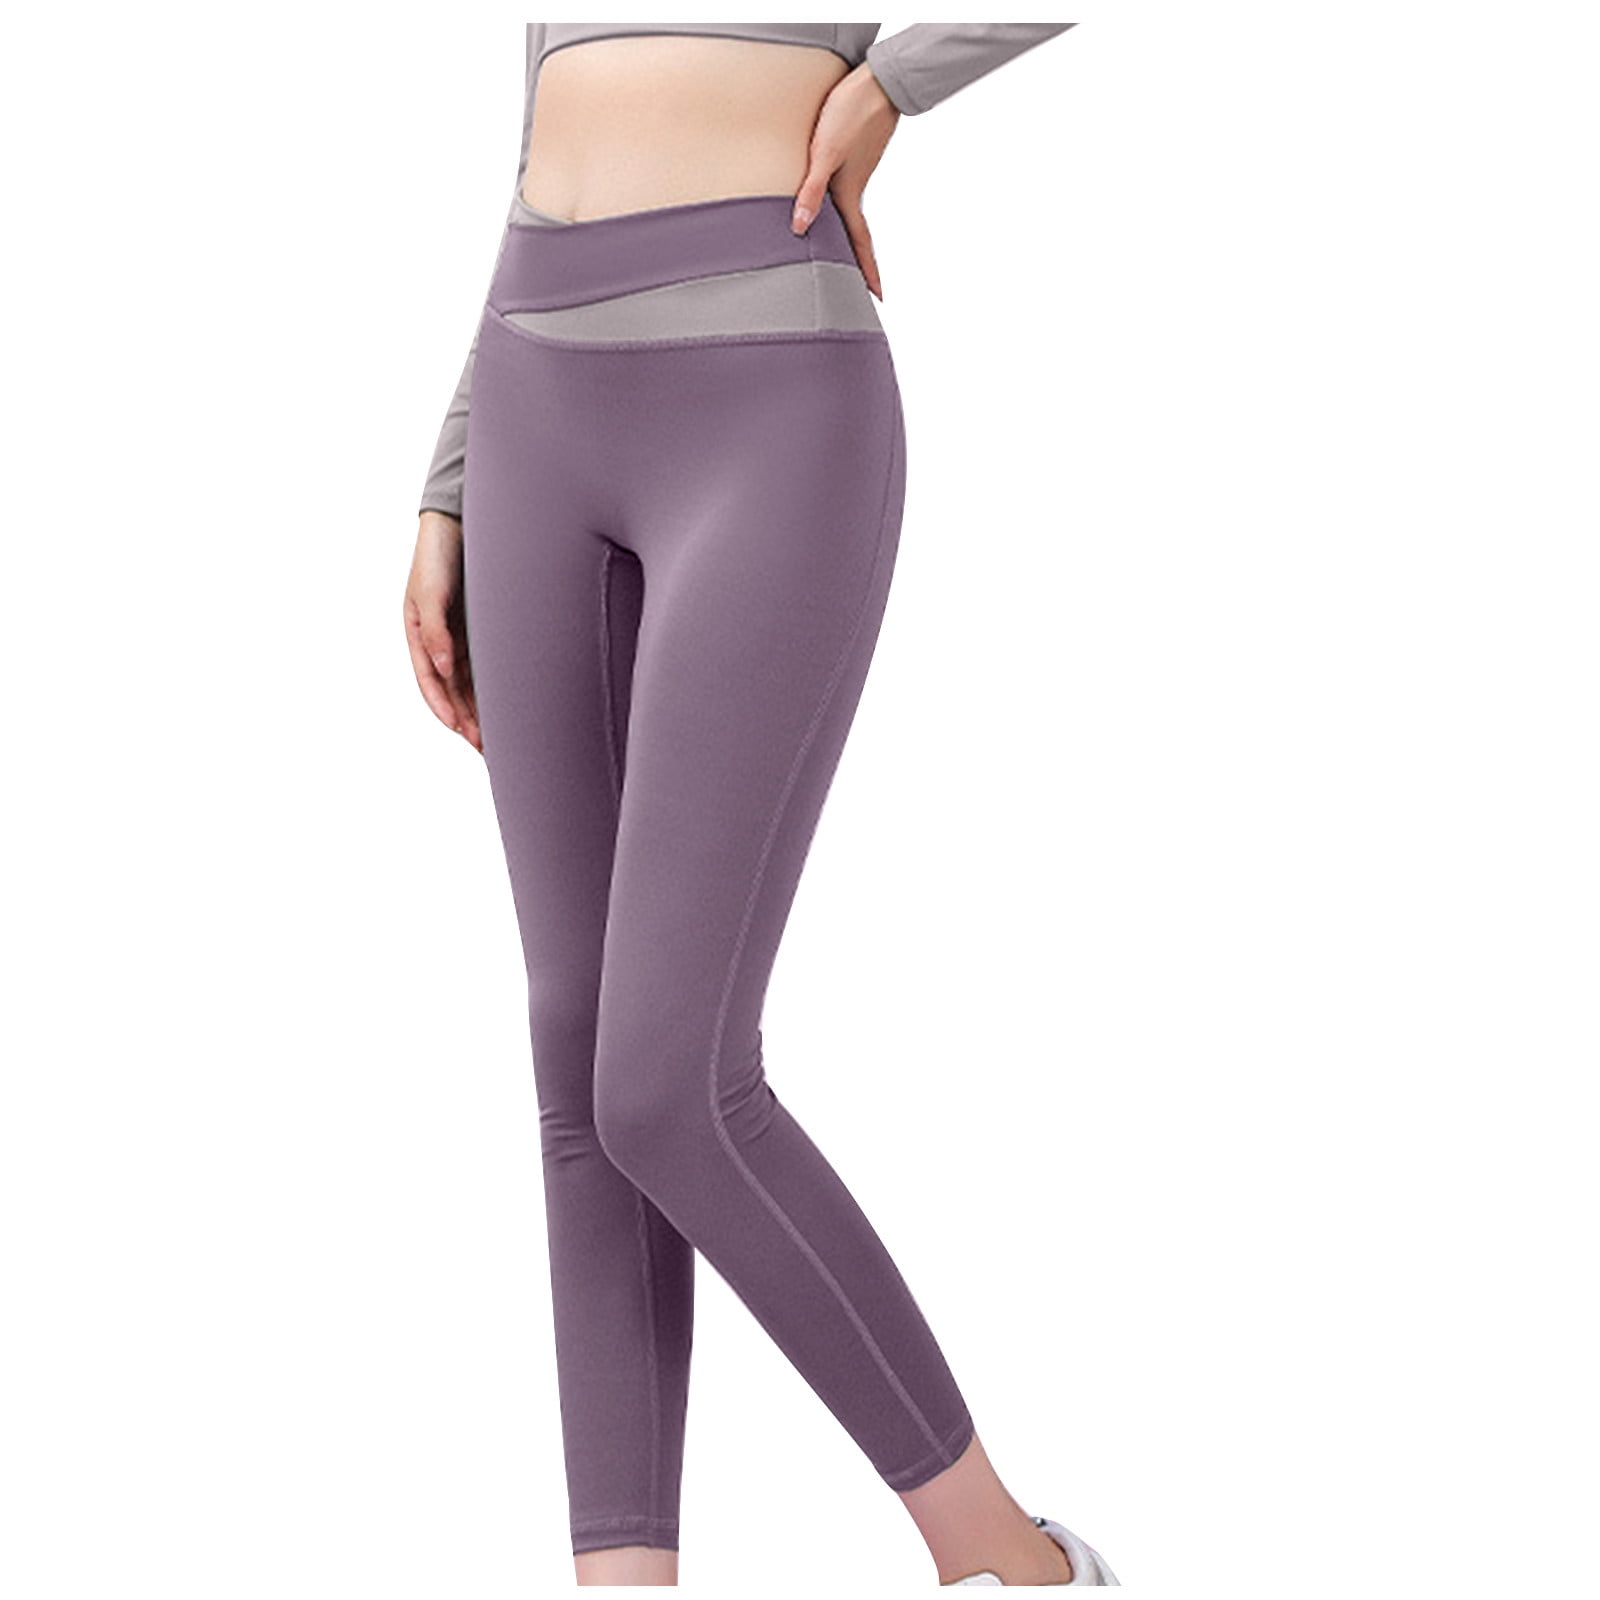 WQJNWEQ Clearance Summer Yoga Pants for Women Ladies Color